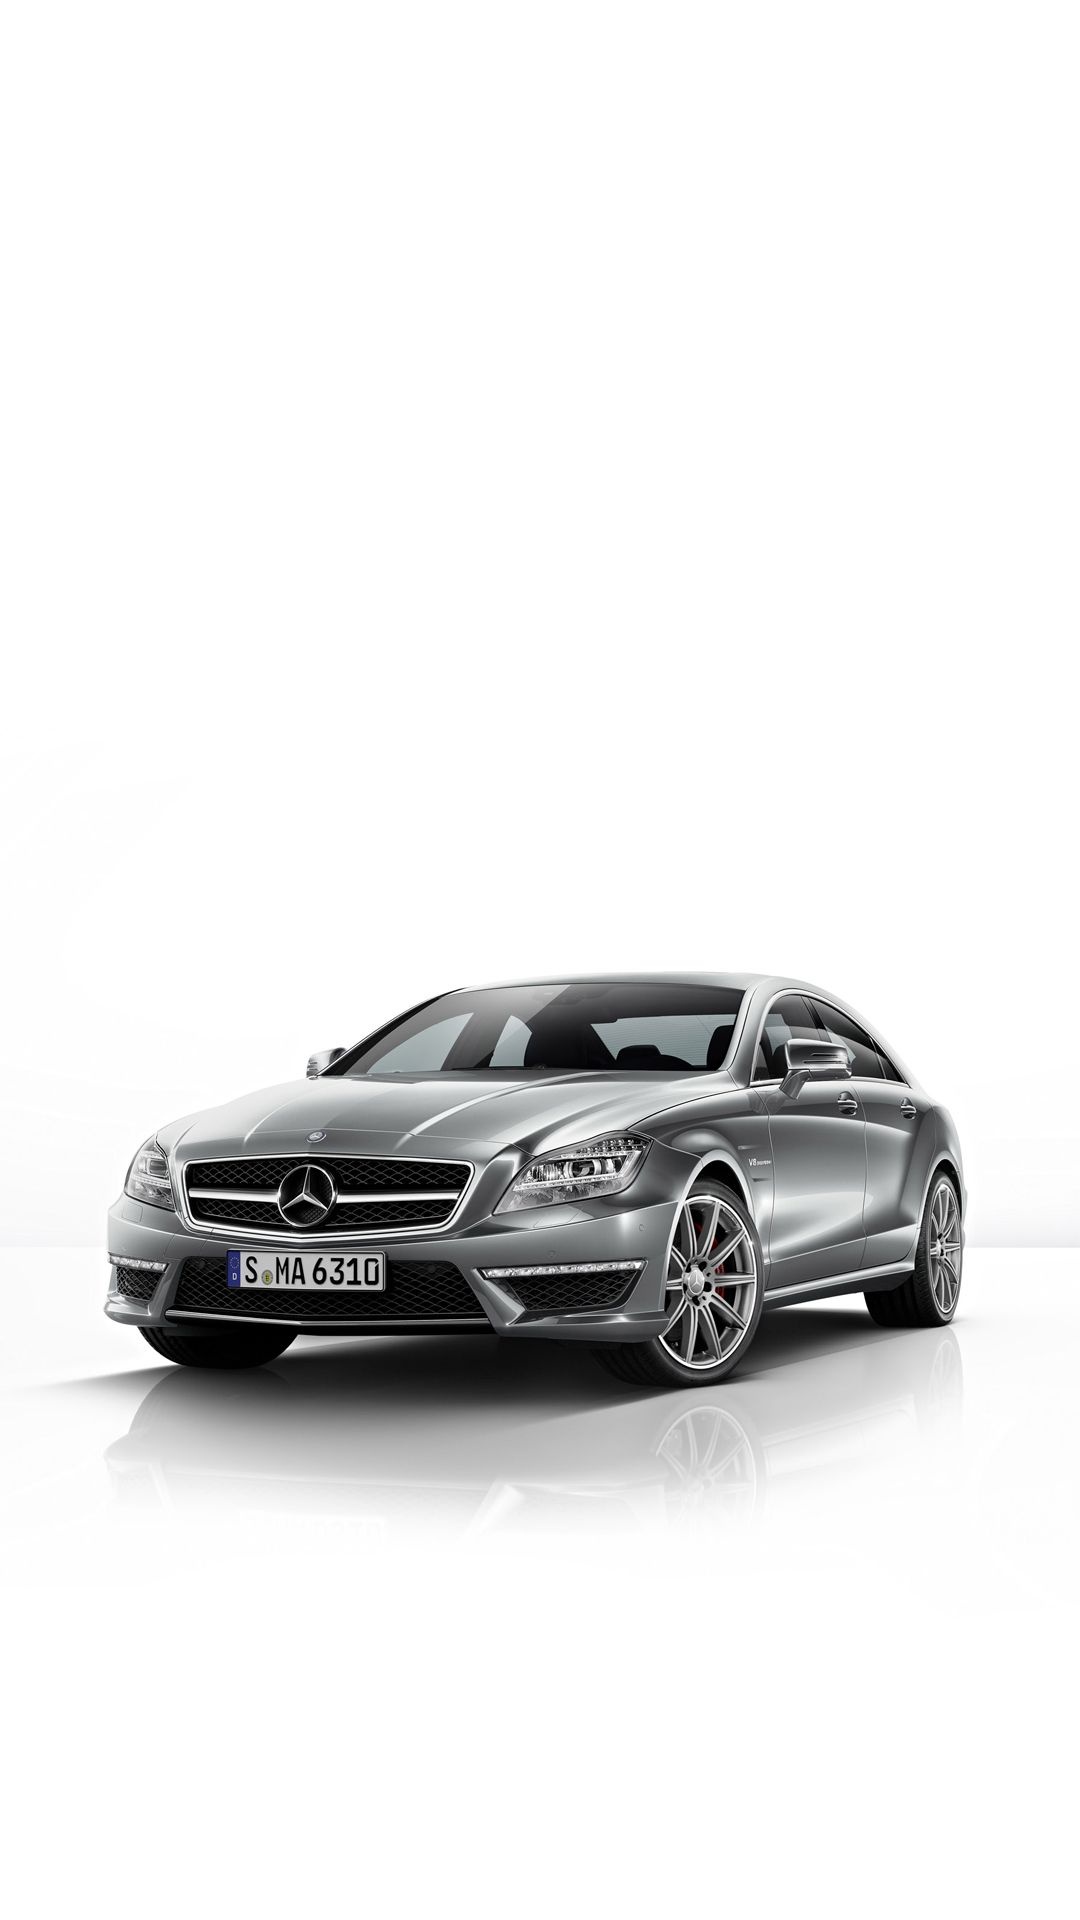 Mercedes-Benz HTC wallpapers, High-quality wallpapers, Luxurious cars, 1080x1920 Full HD Phone